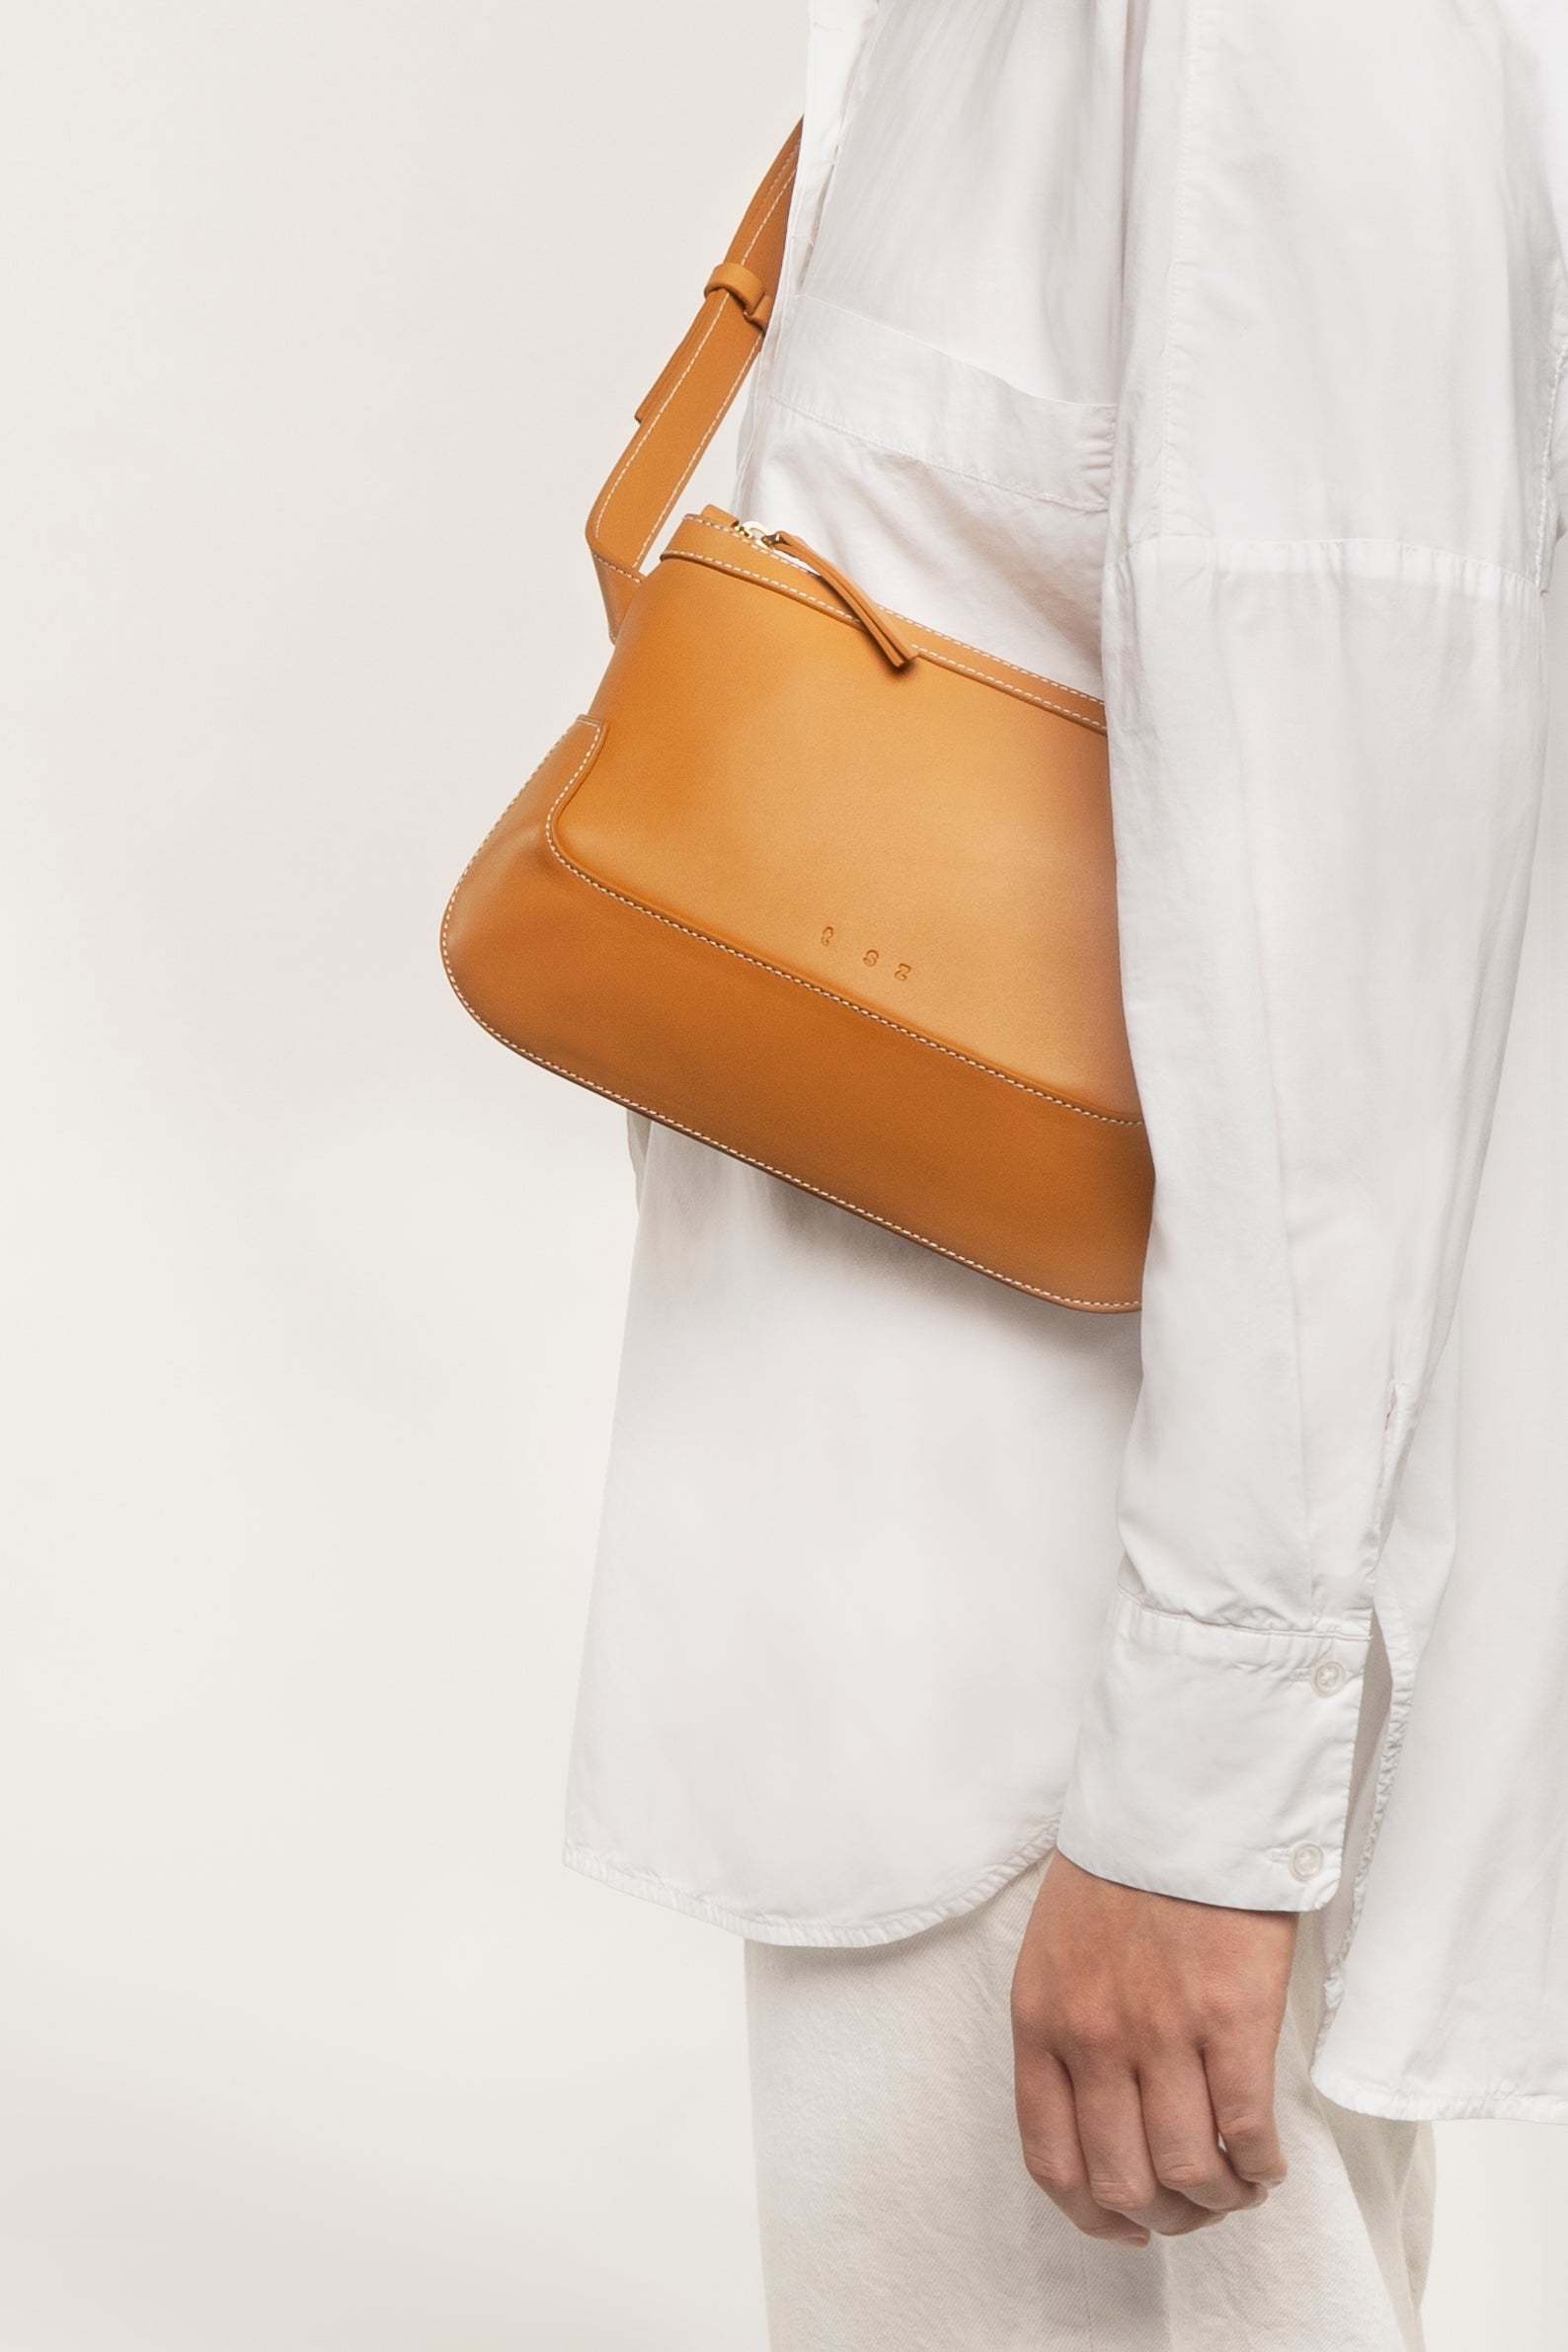 Modern, consciously crafted handbags using only luxury surplus leather